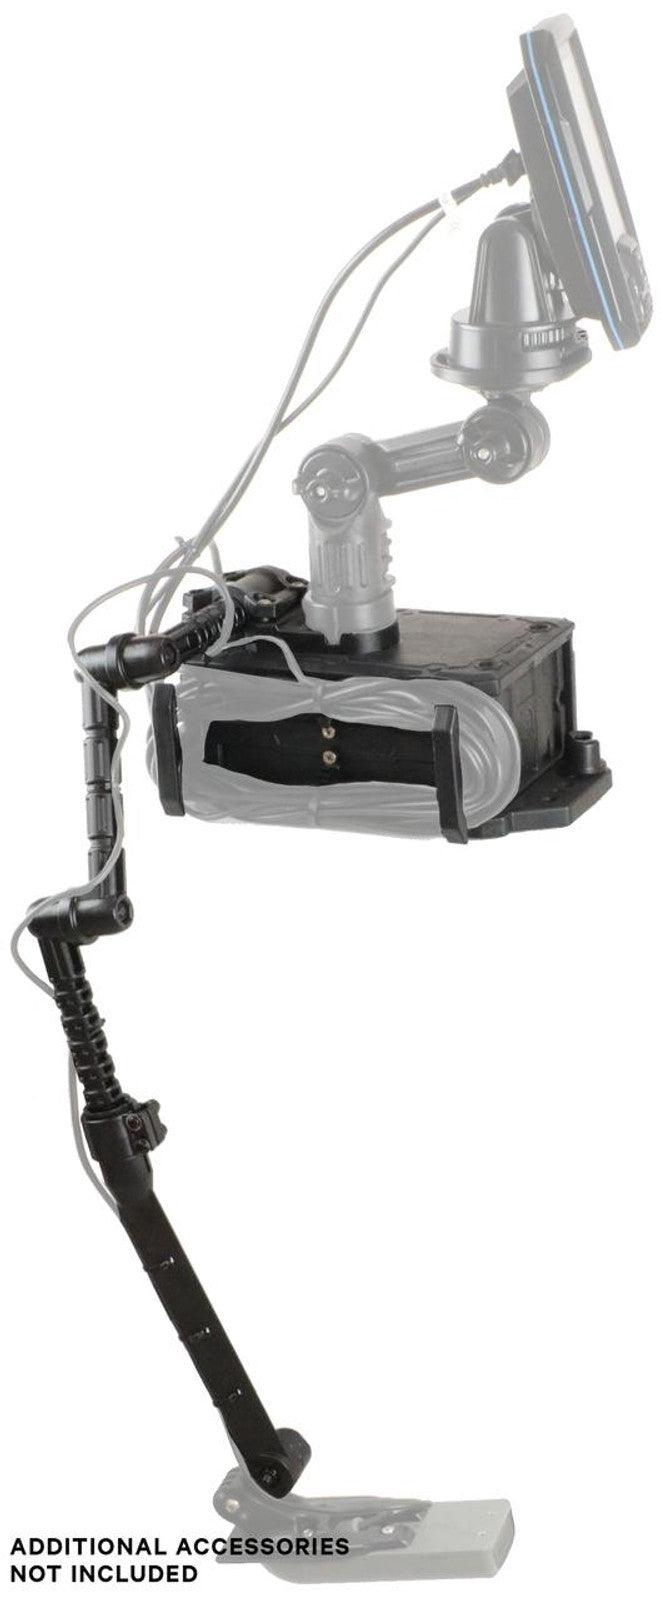 CellBlok Battery Box and SwitchBlade Transducer Arm Combo - OMTC